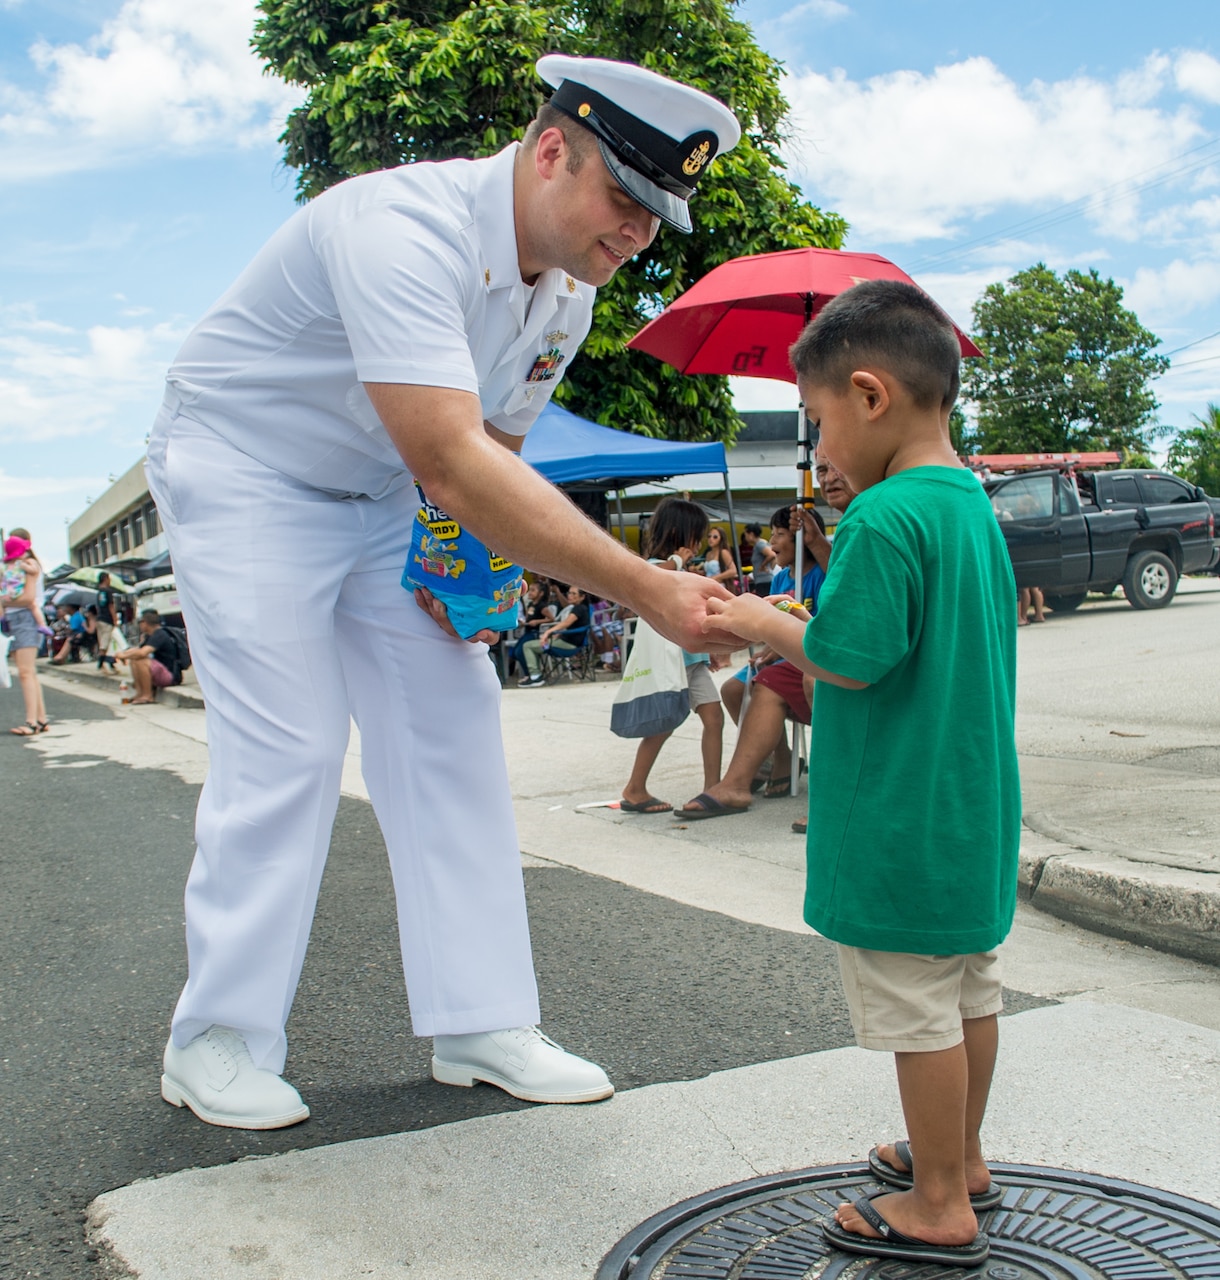 AGANA, Guam (July 21, 2019) Chief Hospital Corpsman Cody Werven, assigned to Commander, Submarine Squadron Fifteen, a native of Cavalier, North Dakota, hands out candy to children during the annual Liberation Day parade. The celebration commemorates the 75th anniversary of the liberation of Guam from Japanese occupation by U.S. forces during World War II.